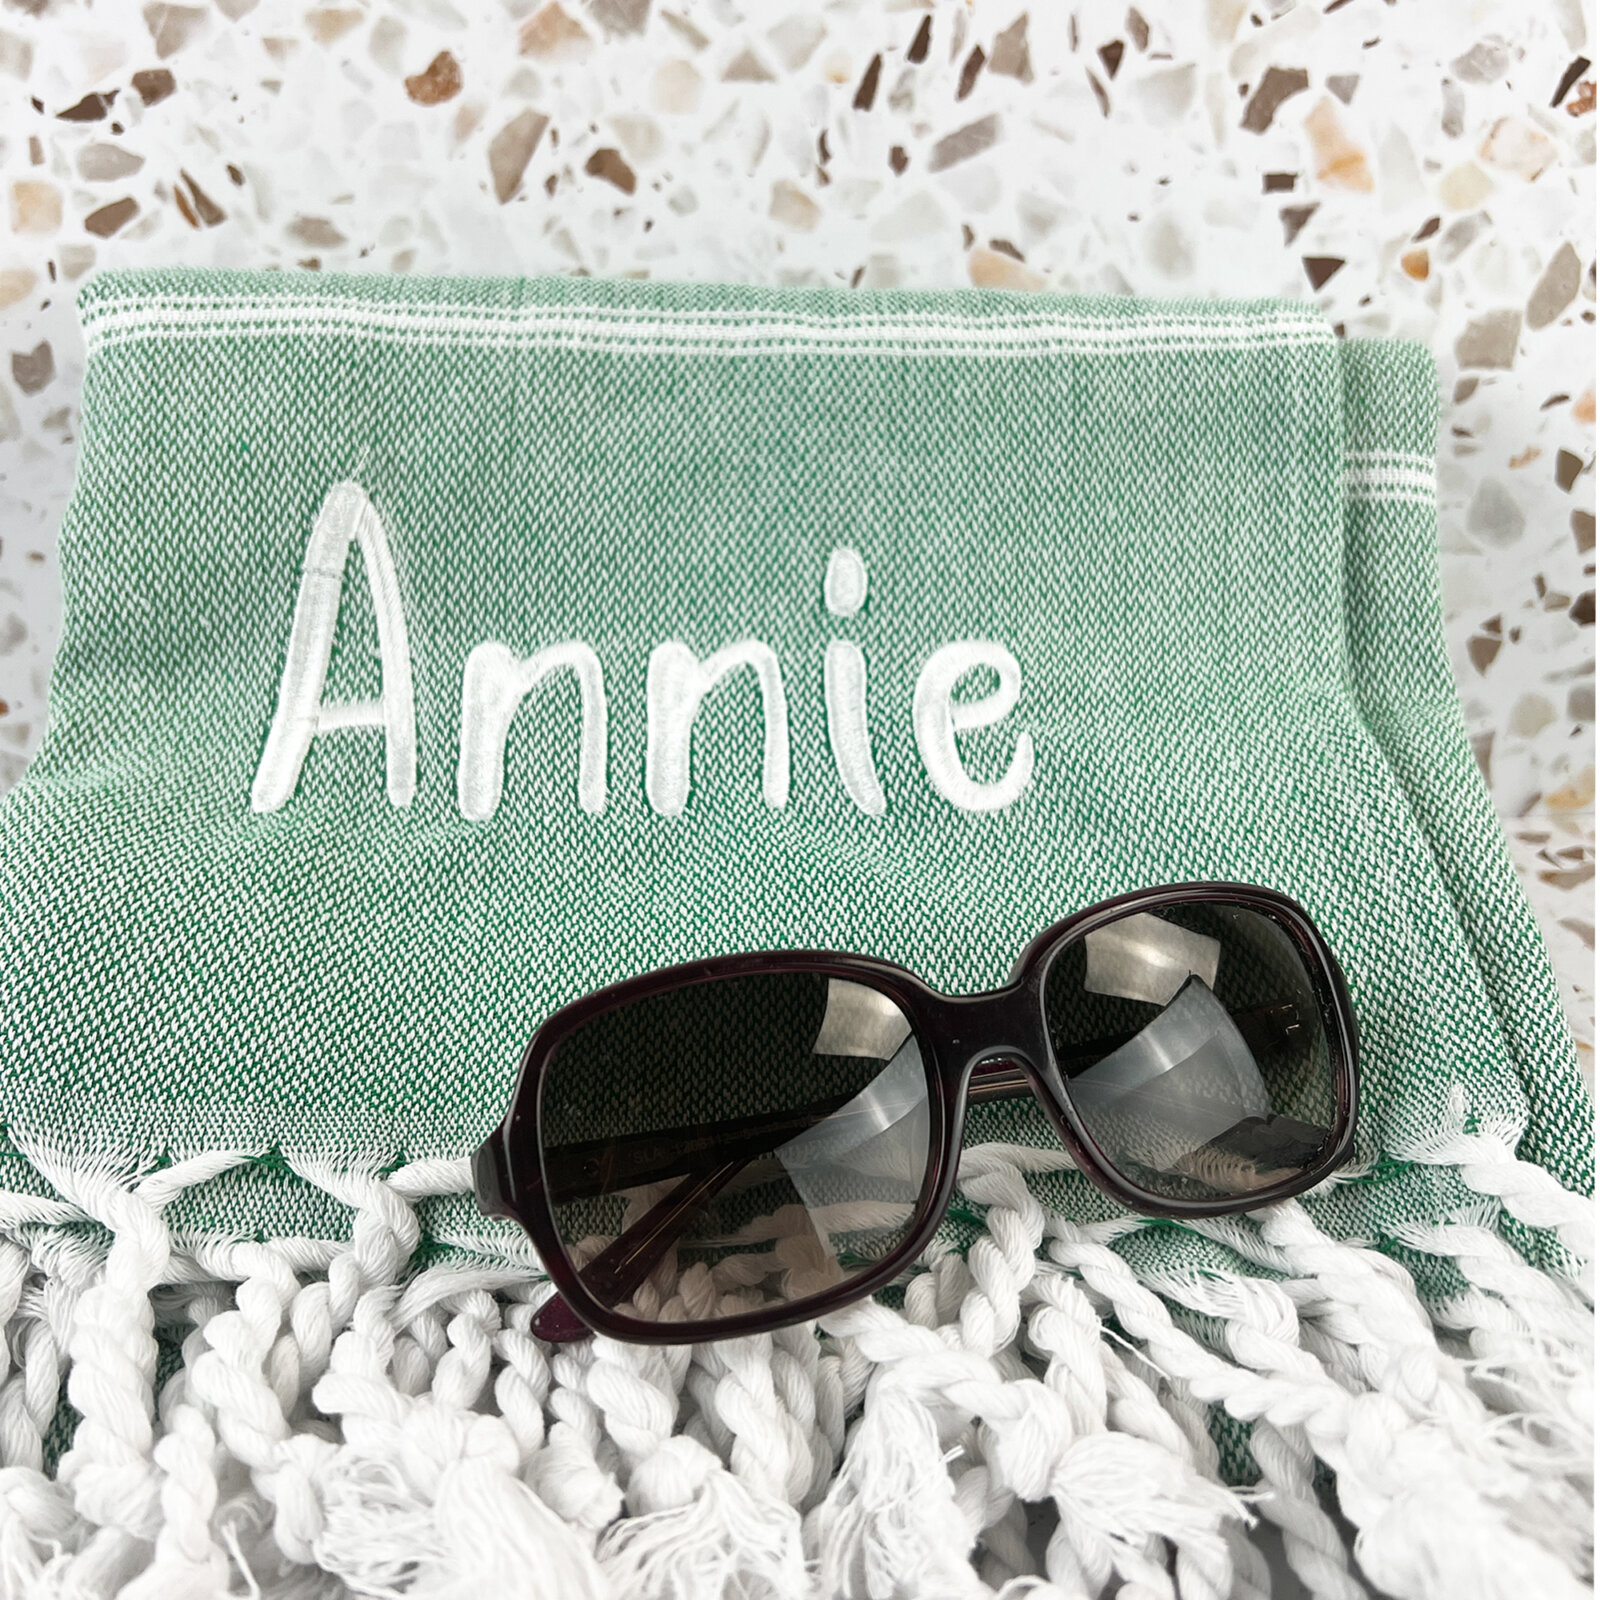 Beach towels with name embroidered